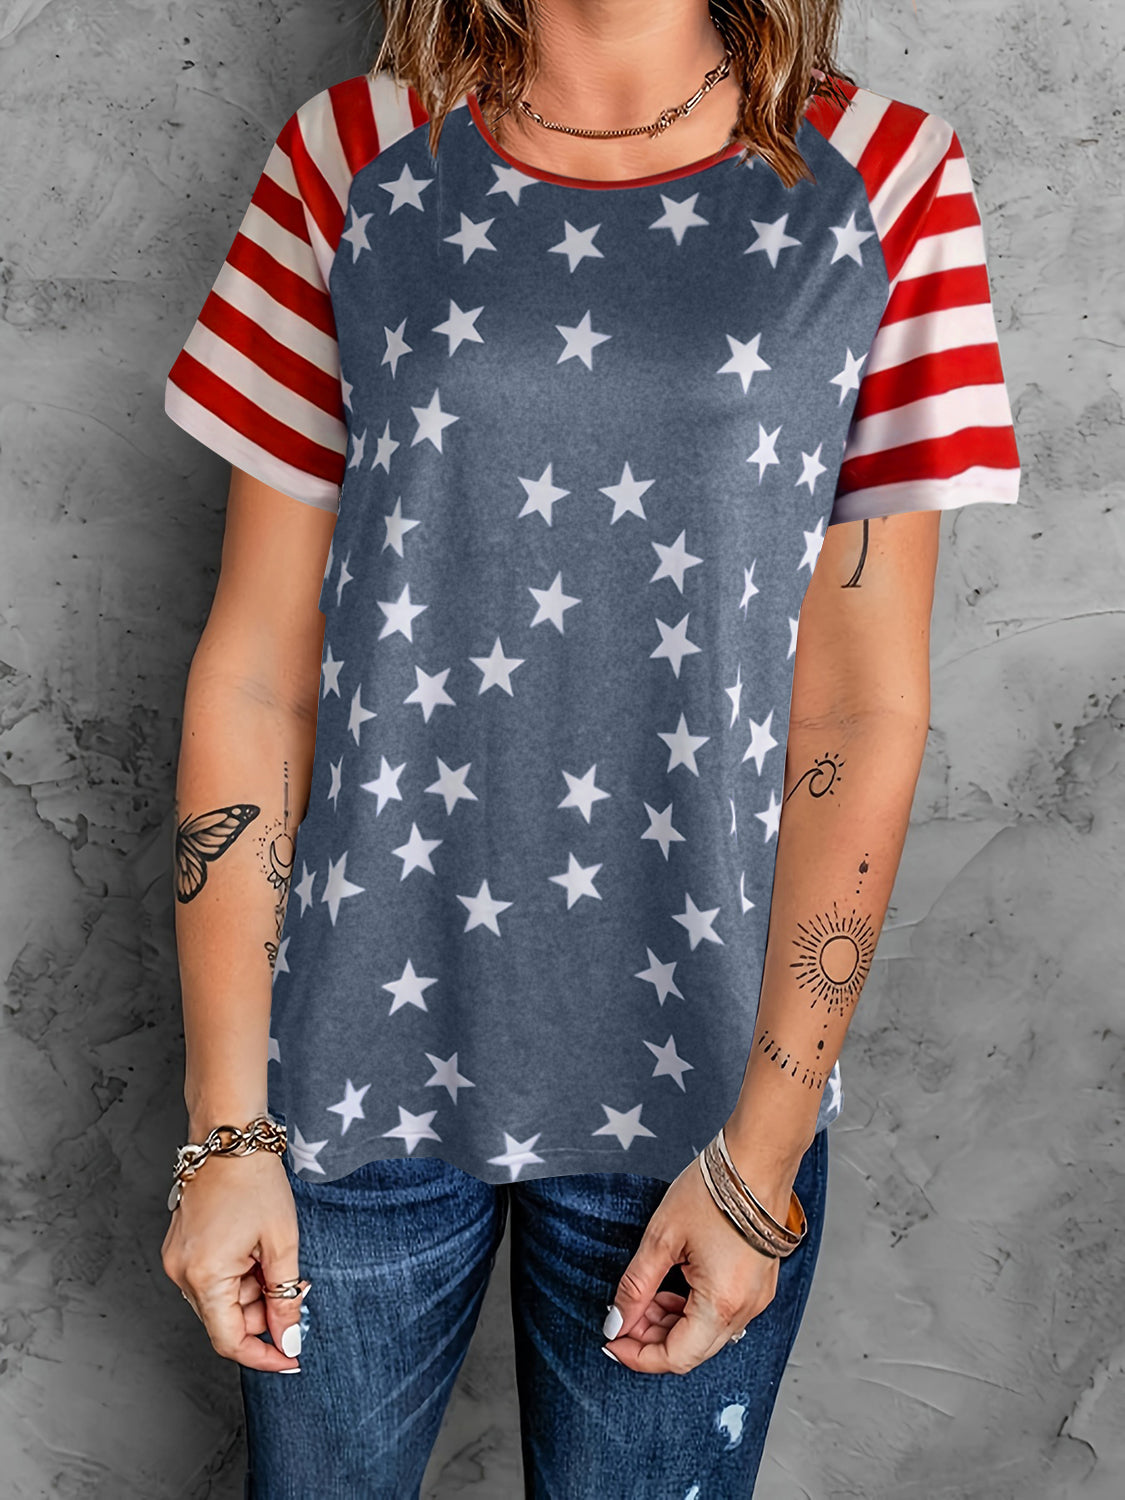 Explore More Collection - Full Size Star Striped Round Neck Short Sleeve T-Shirt